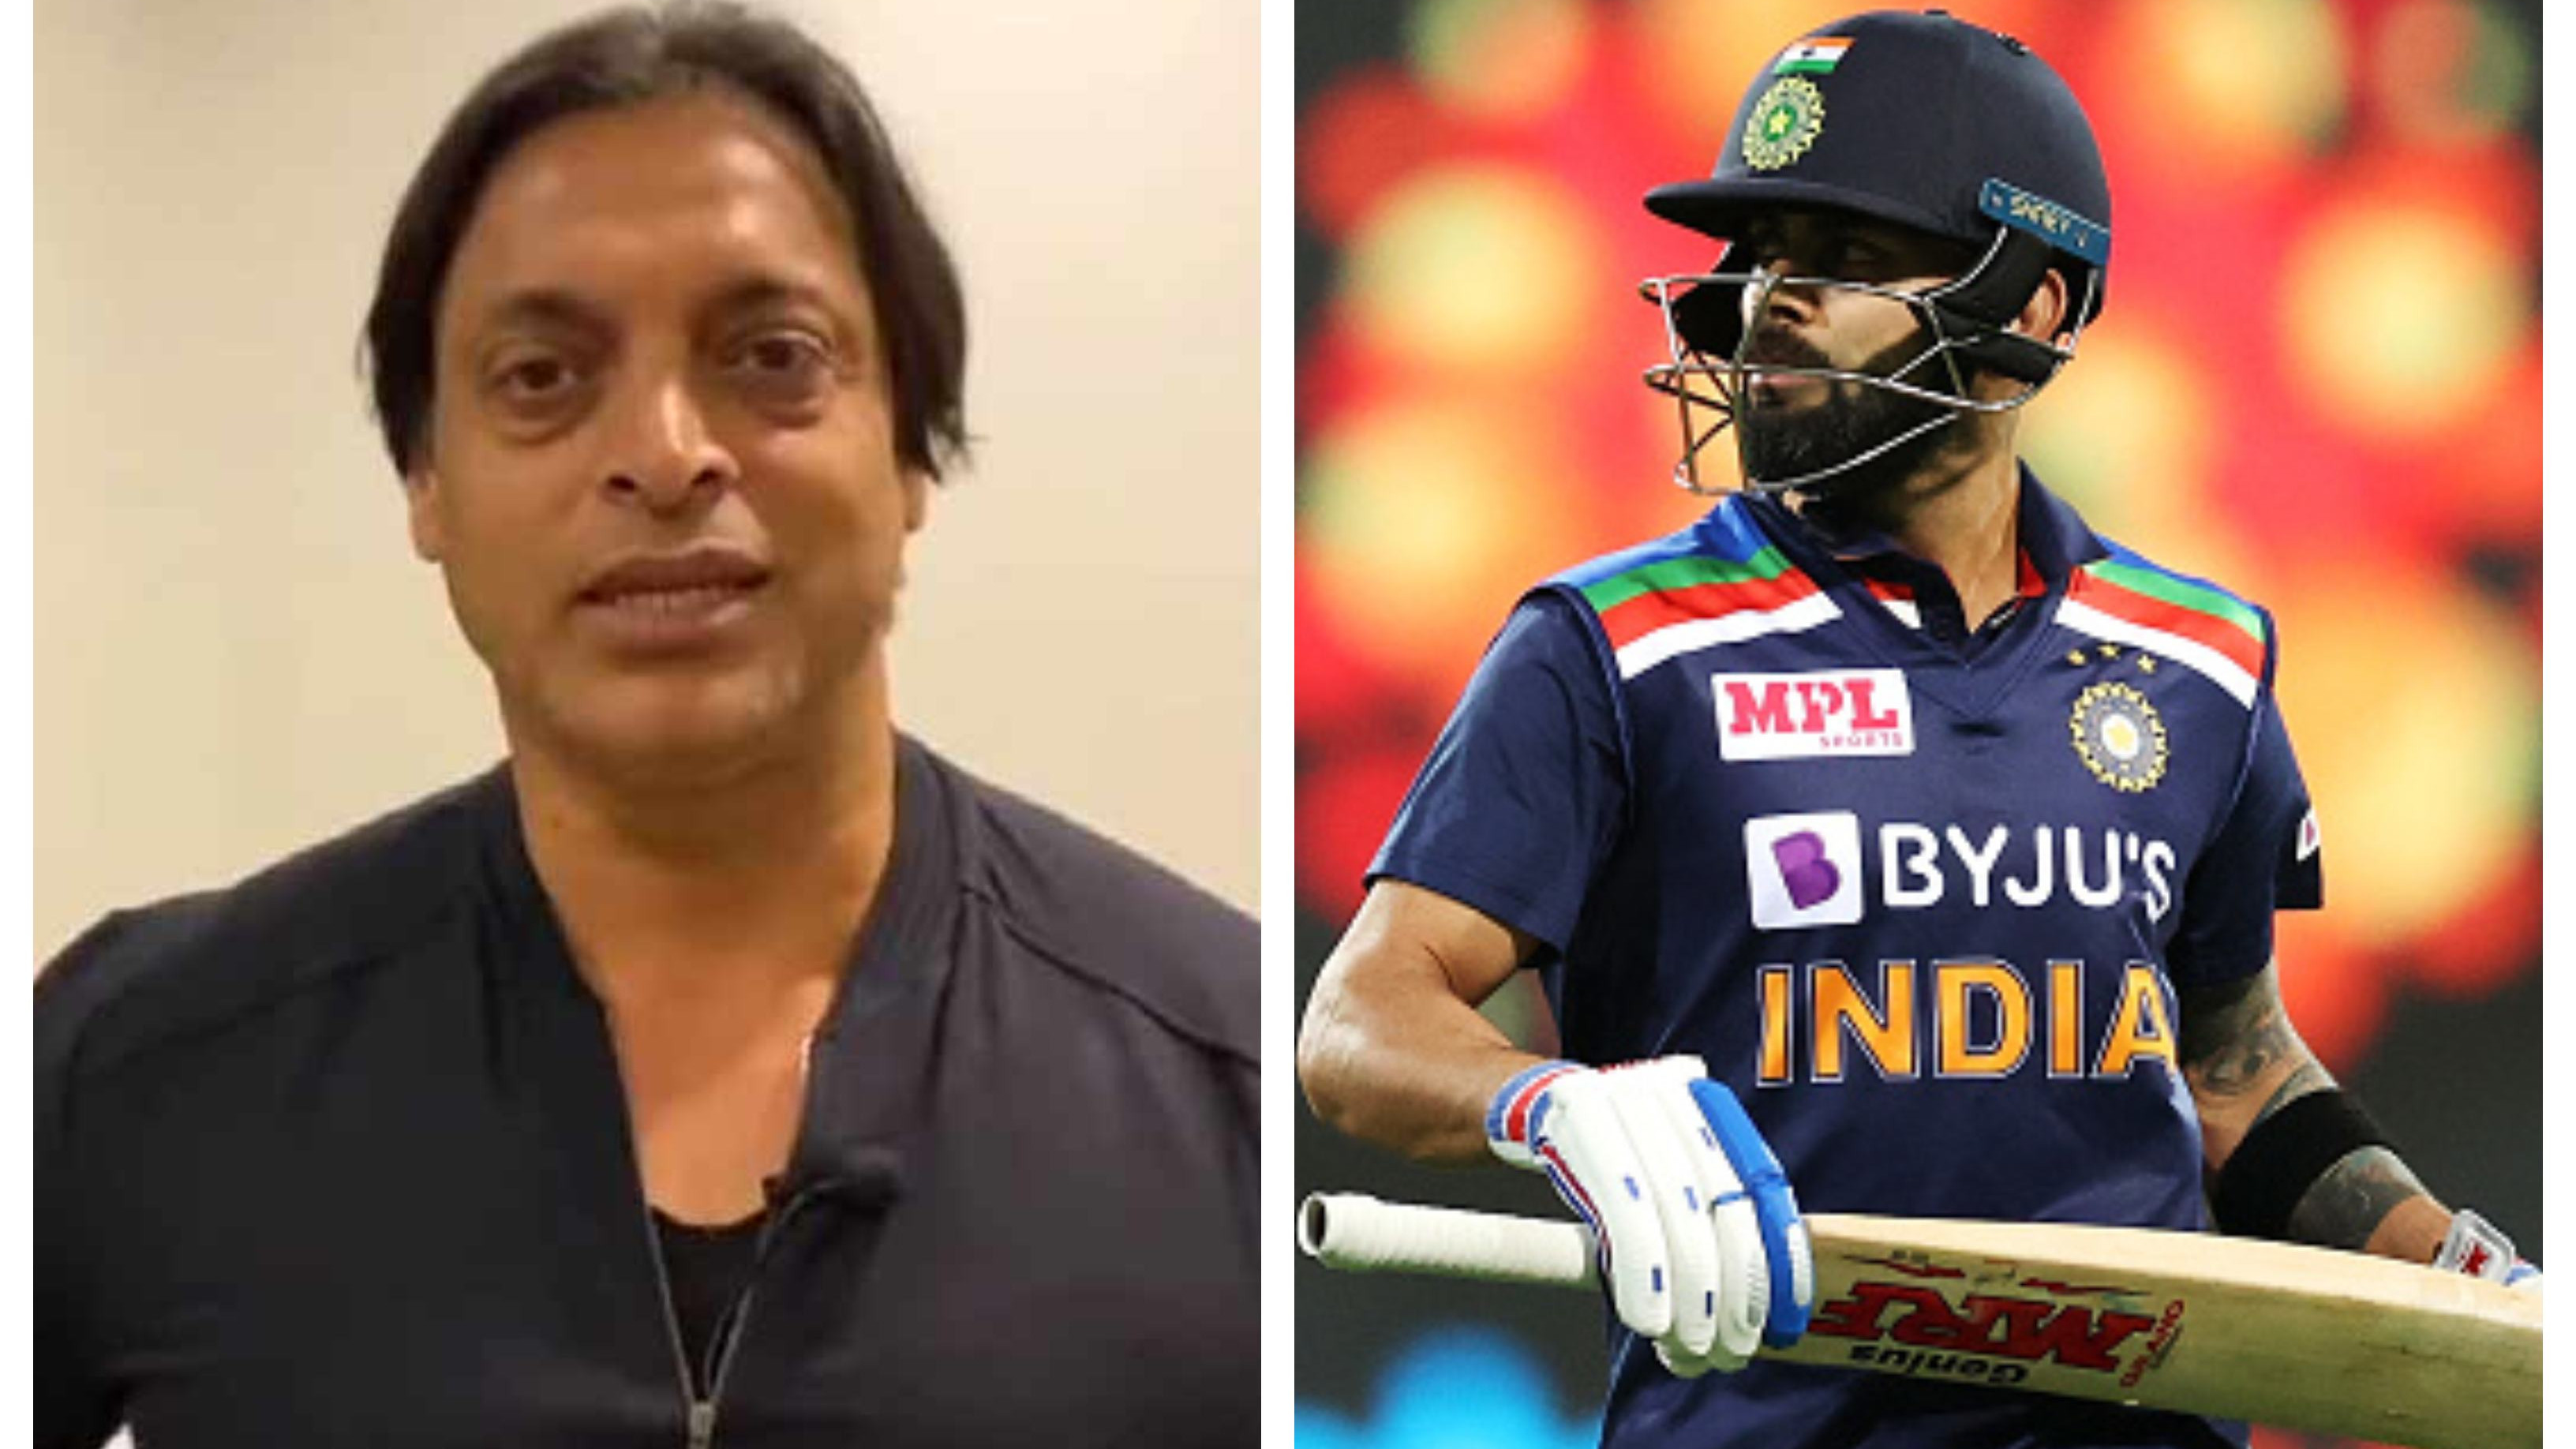 WATCH: Shoaib Akhtar includes four Indians in his all-time ODI XI, ignores Virat Kohli